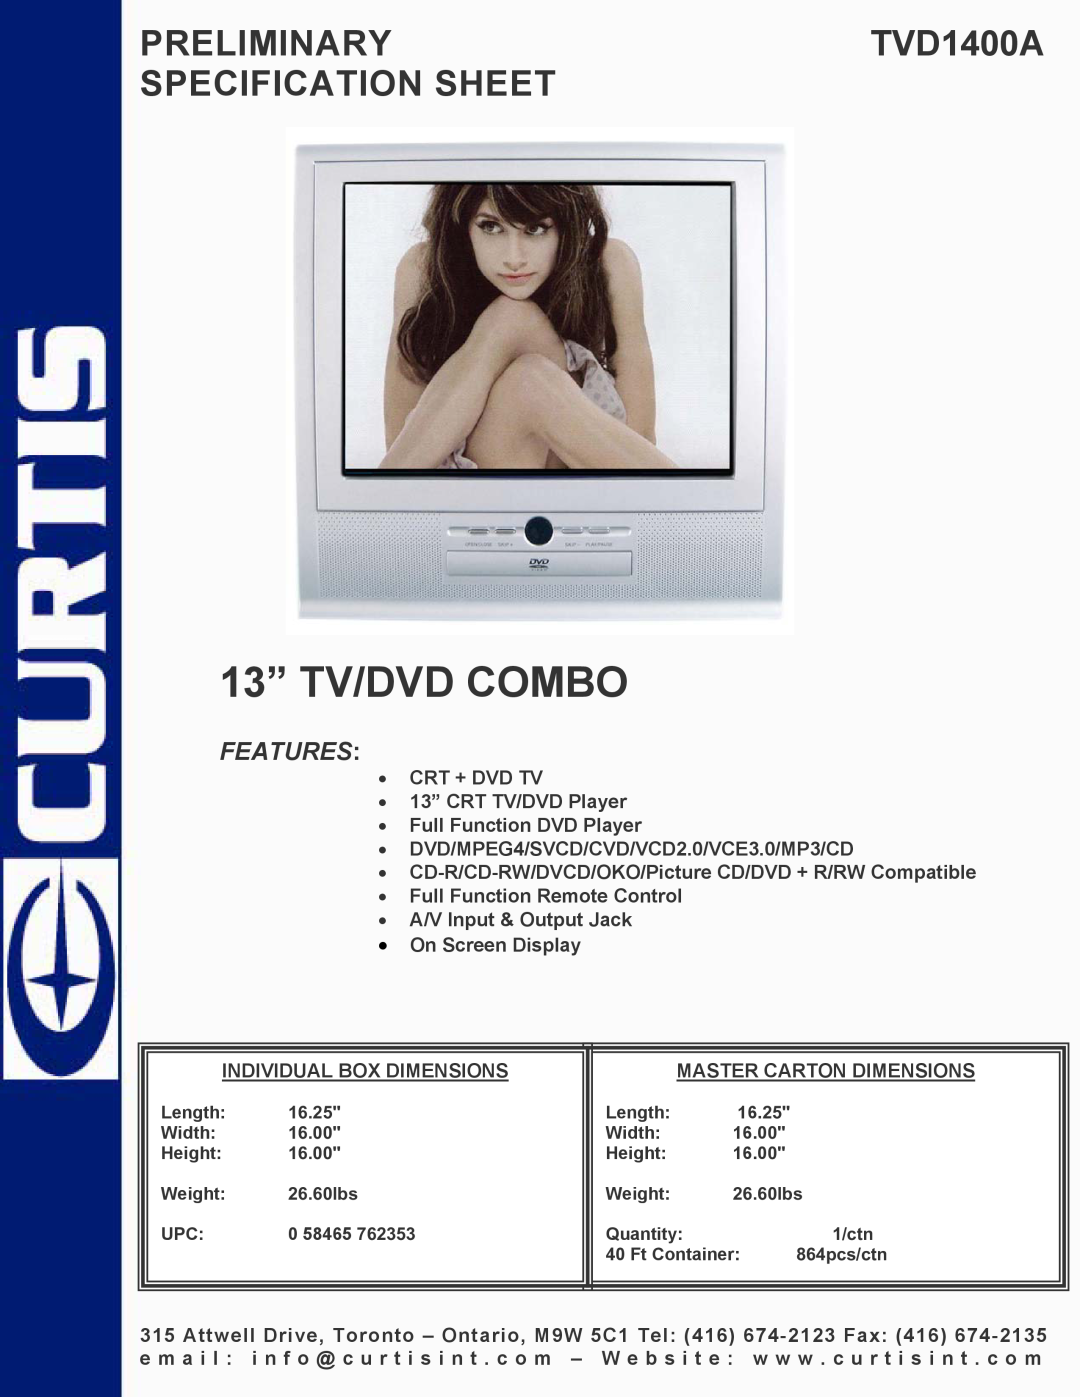 Curtis specifications 13” TV/DVD COMBO, PRELIMINARYTVD1400A SPECIFICATION SHEET, Features 